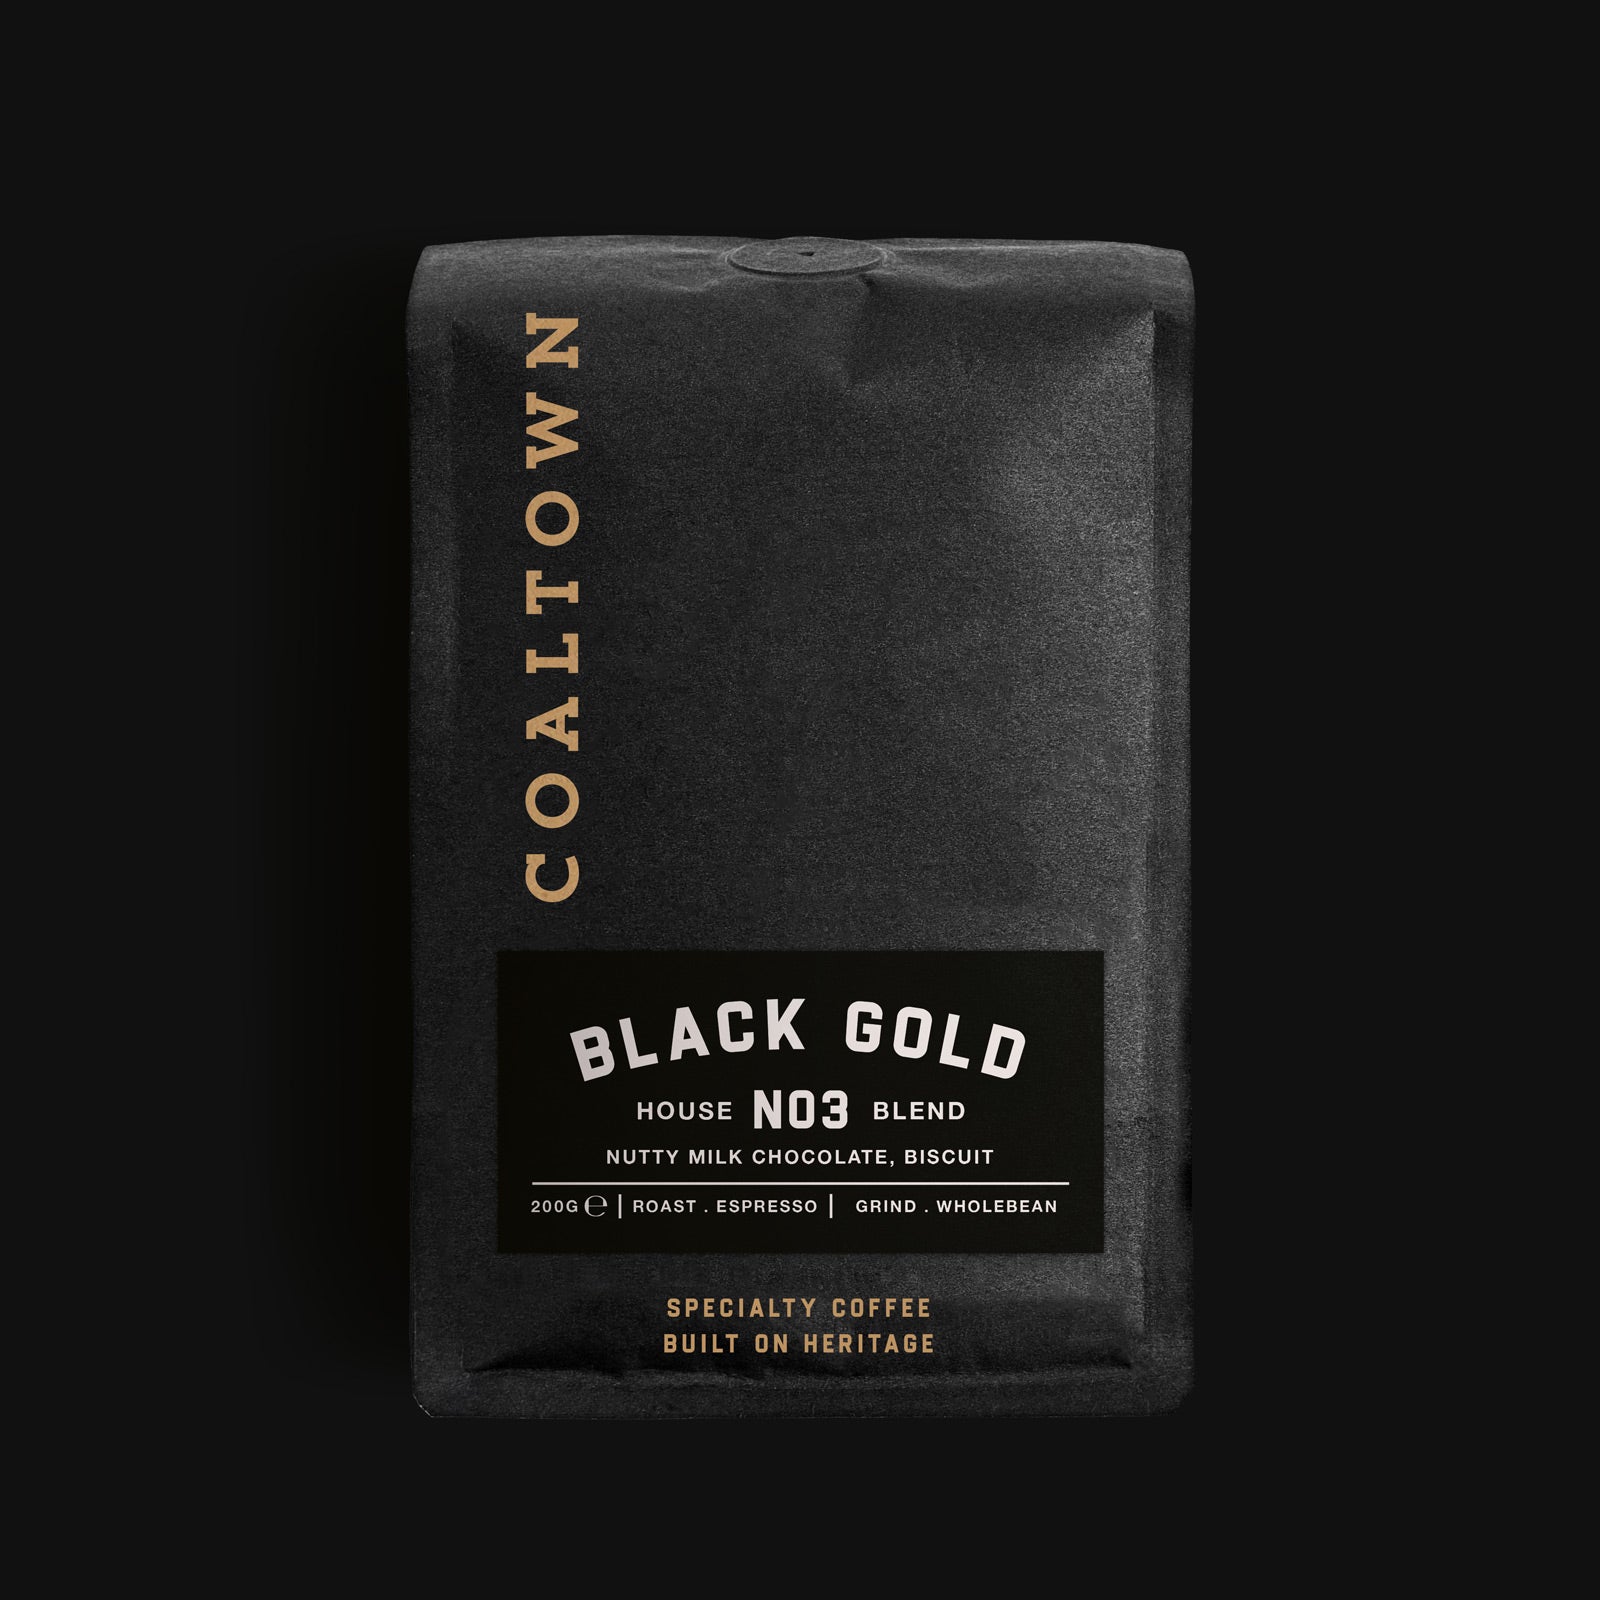 Black-Gold-no3-Subscription-House-Bland-Coffee-200g-Bag